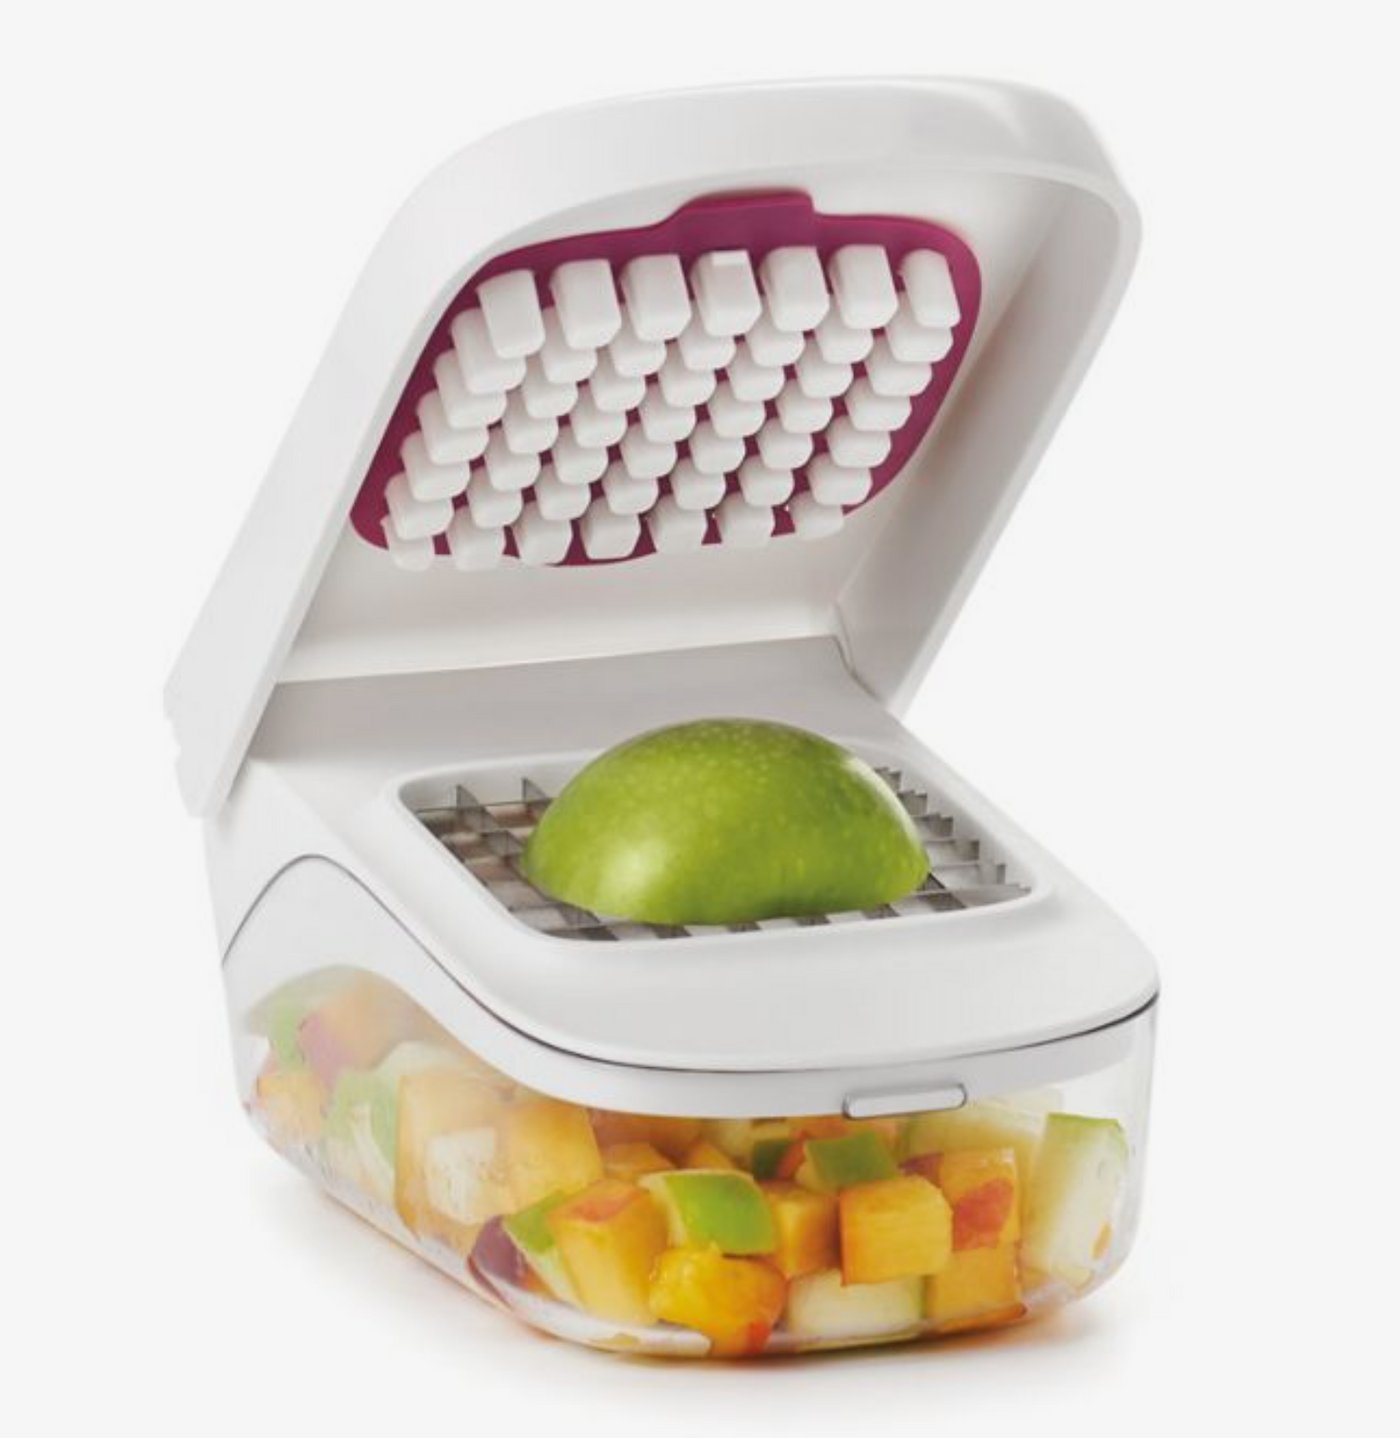 OXO Good Grips Vegetable and Onion Chopper with Easy Pour Opening White